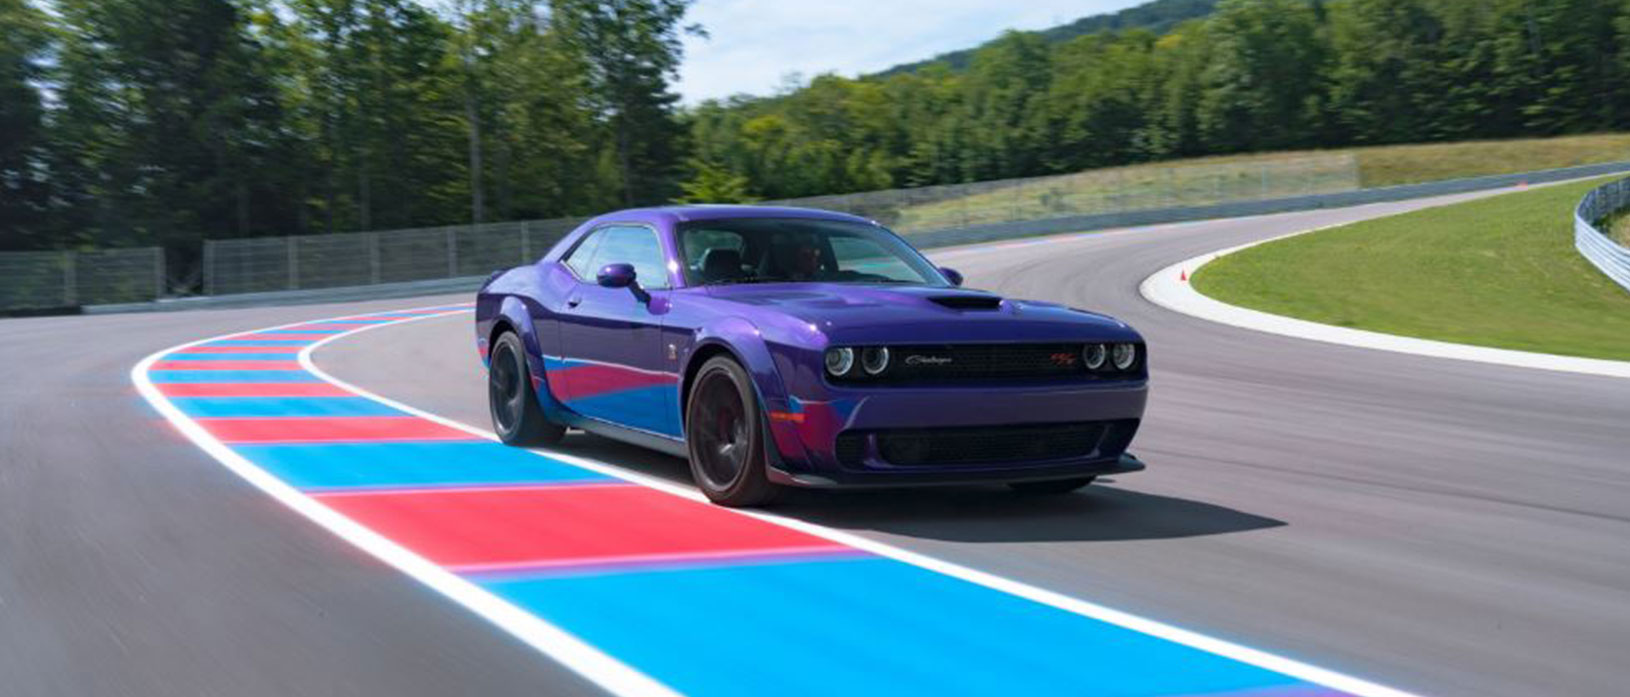 Plum Crazy Scat Pack Challenger driving on a road course